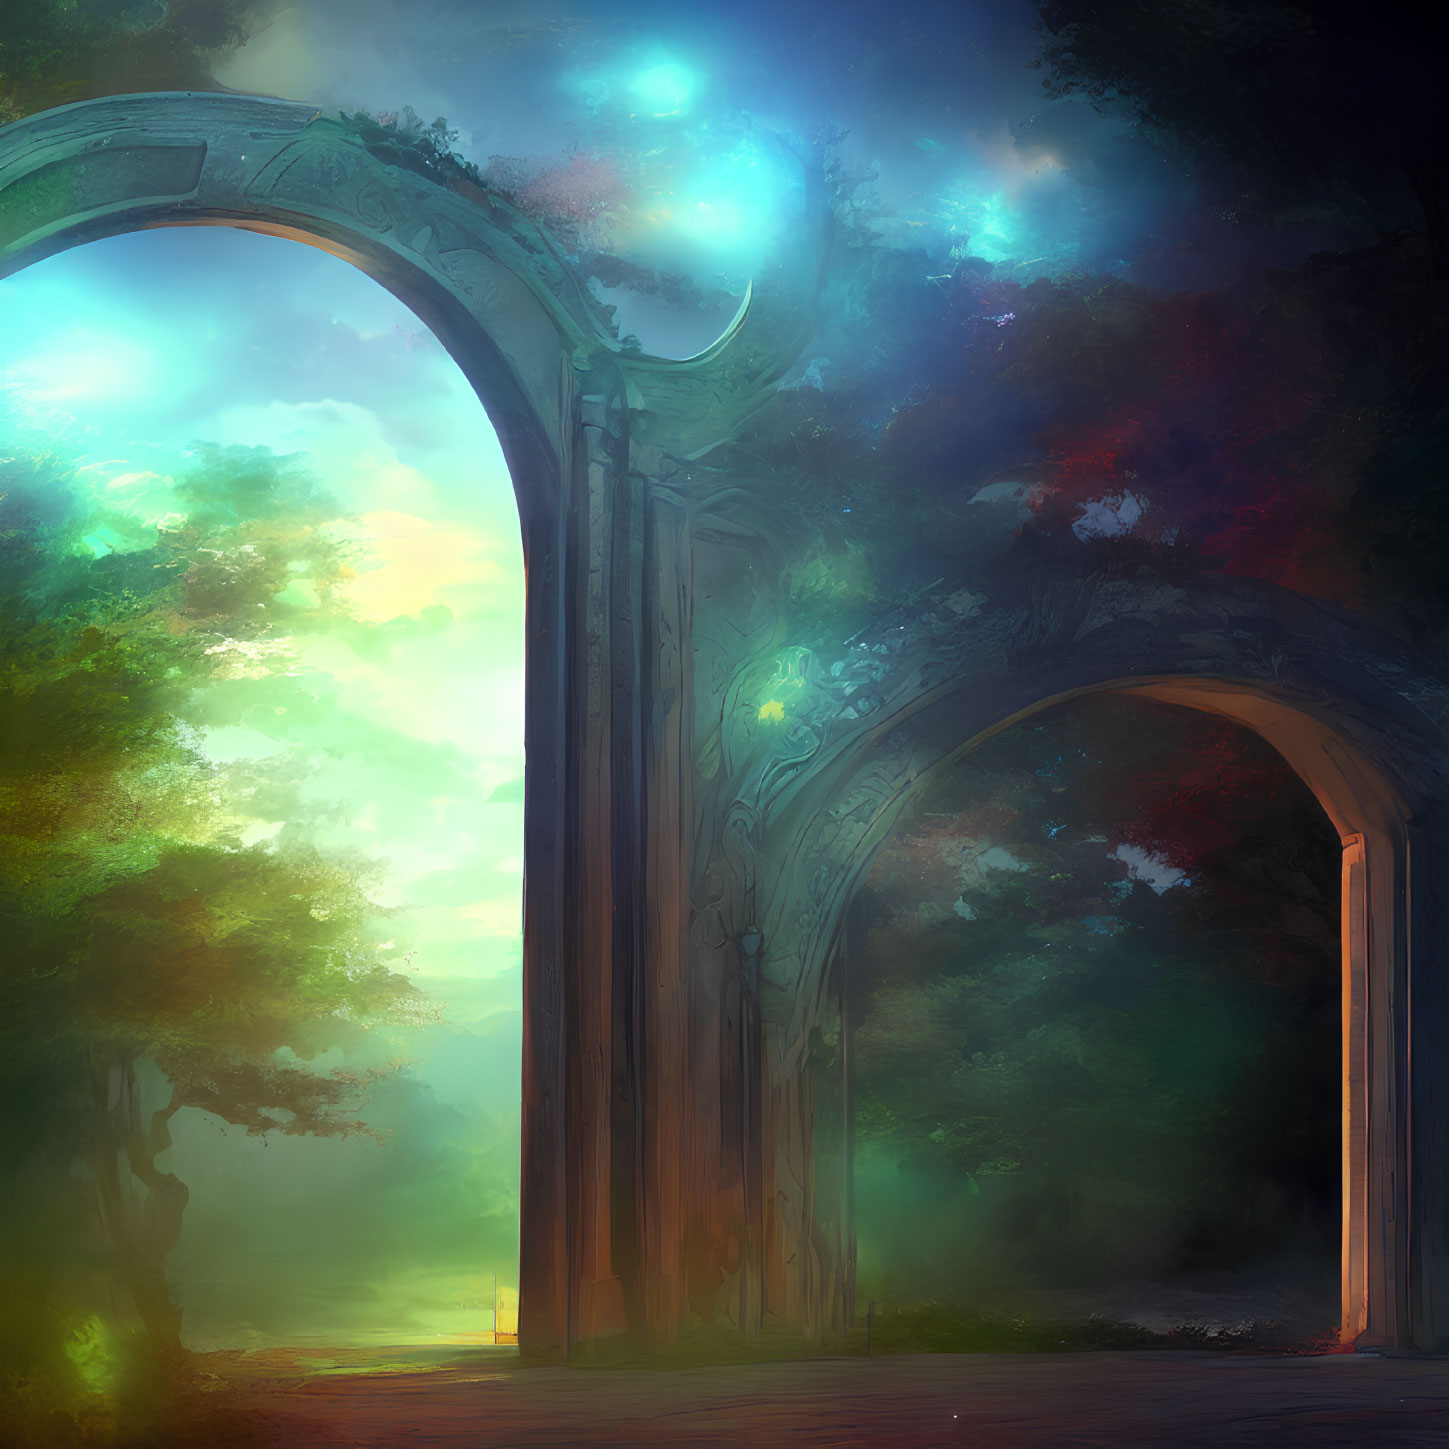 Majestic arched ruins in ethereal forest scene